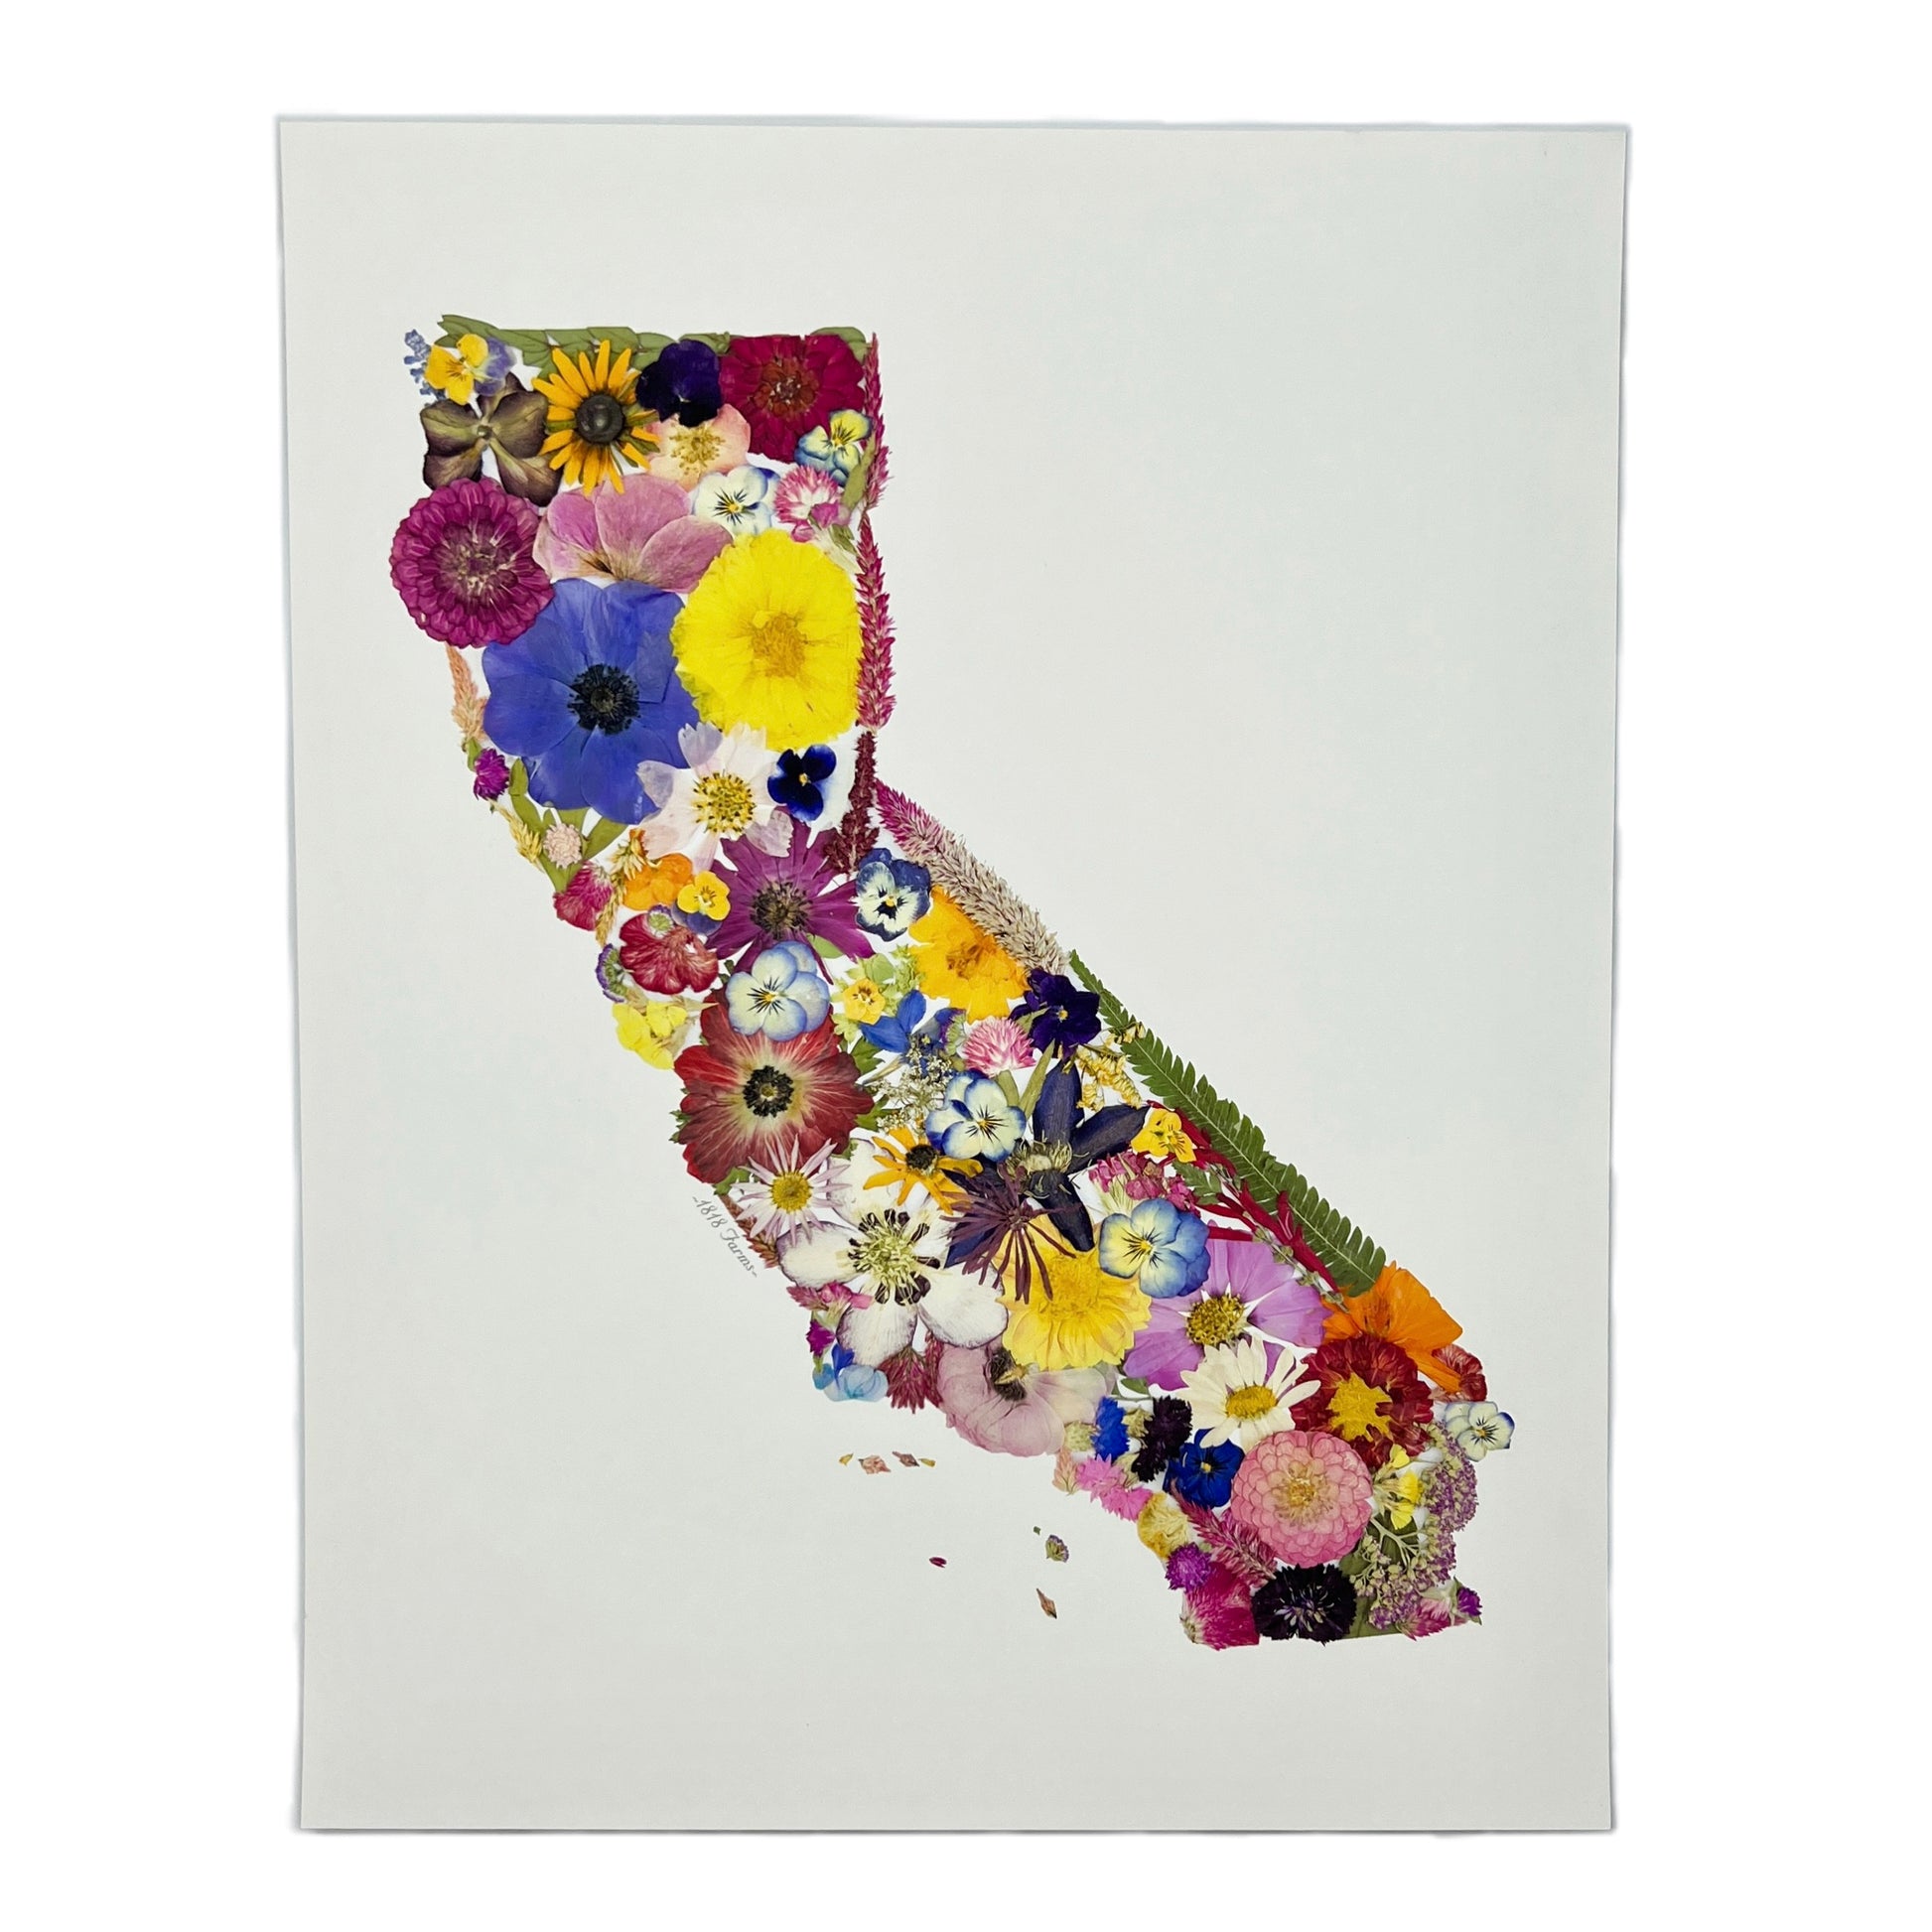 State Themed Giclée Print Featuring Dried, Pressed Flowers - "Where I Bloom" Collection Giclee Art Print 1818 Farms 8"x10" California 